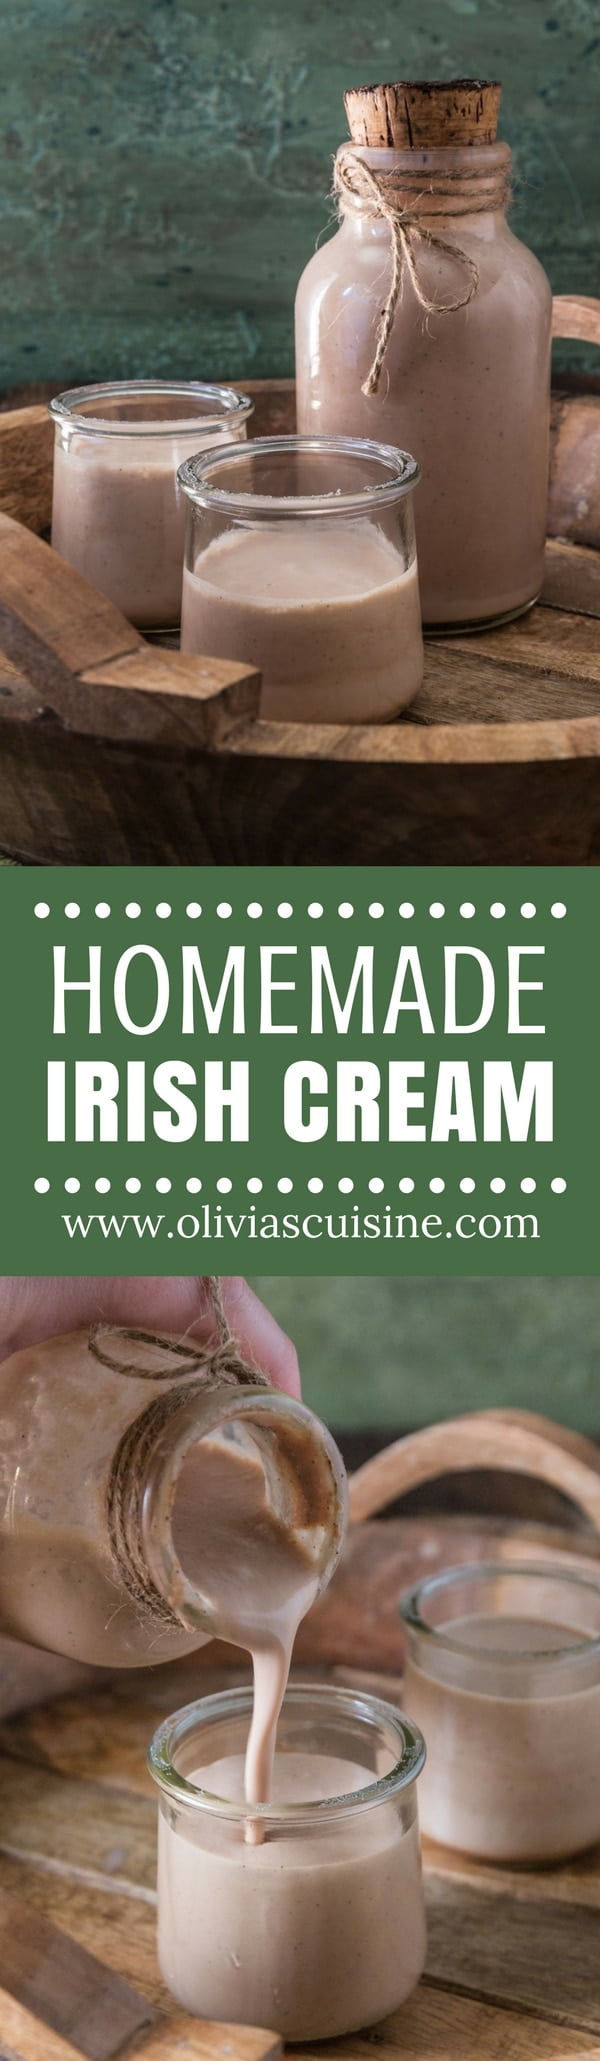 Homemade Irish Cream | www.oliviascuisine.com | Have you ever tried making homemade Irish cream? A blender and a handful of ingredients is all it takes for this do-it-yourself version of Bailey's. Smooth, creamy and perfect for St. Patrick's Day! (Recipe and food photography by @oliviascuisine.)